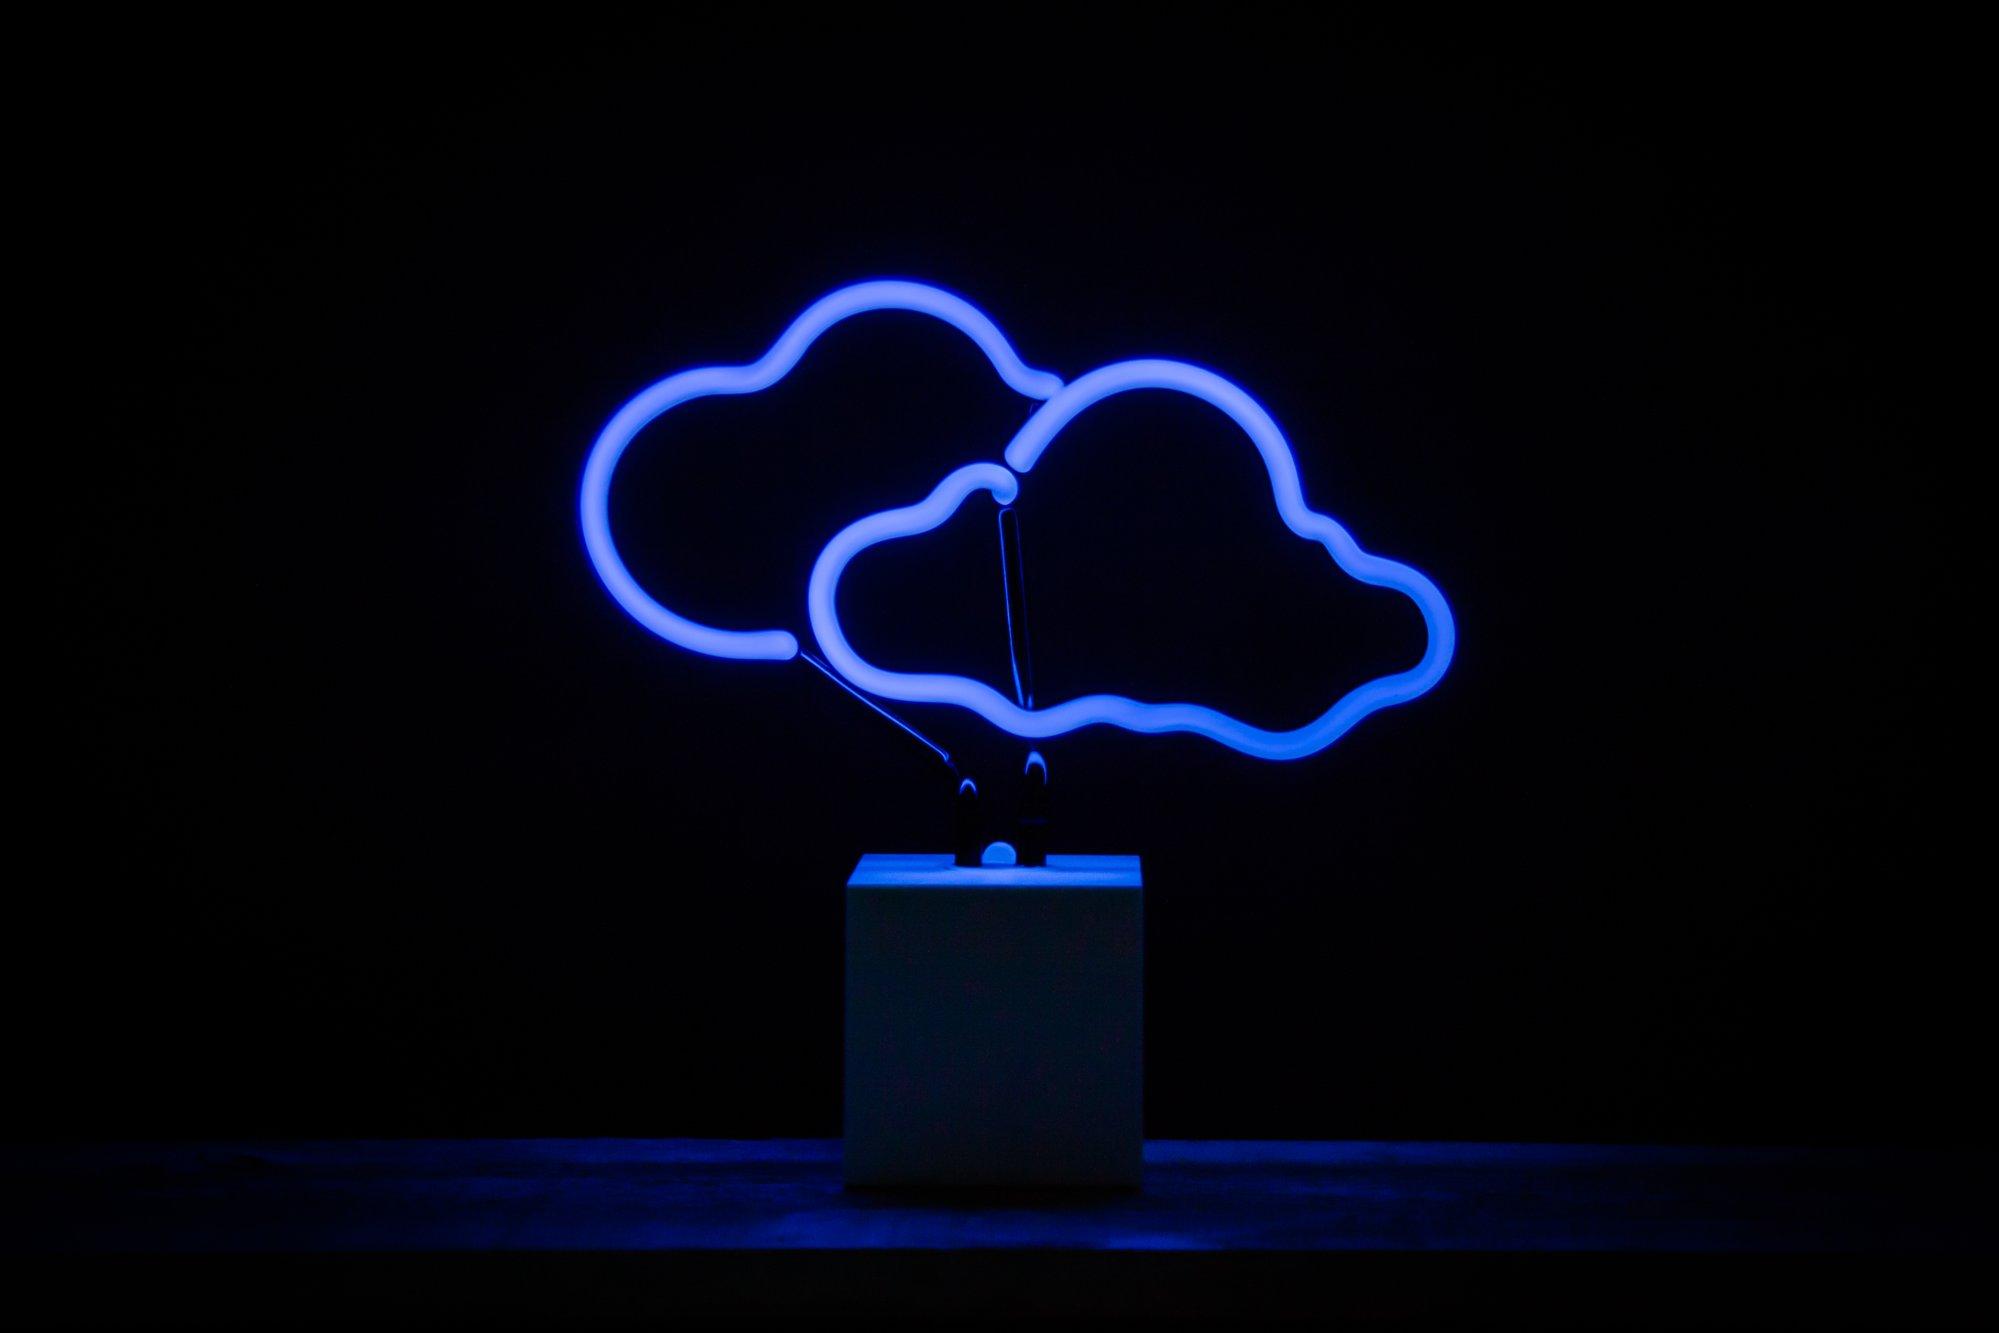 A blue neon light with clouds in it - Neon blue